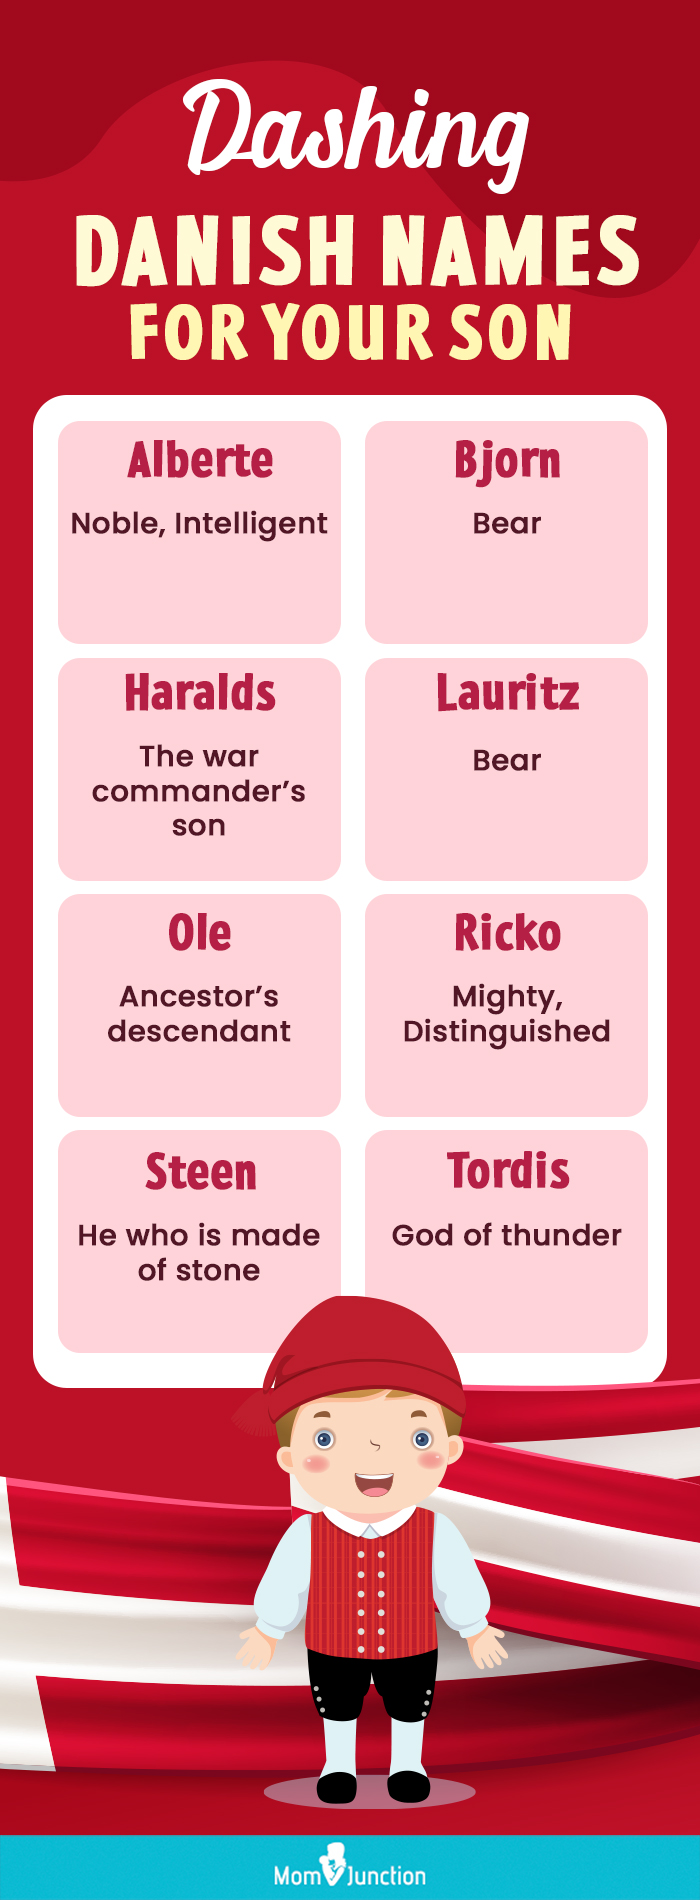 Dashing Danish Names For Your Son (infographic)